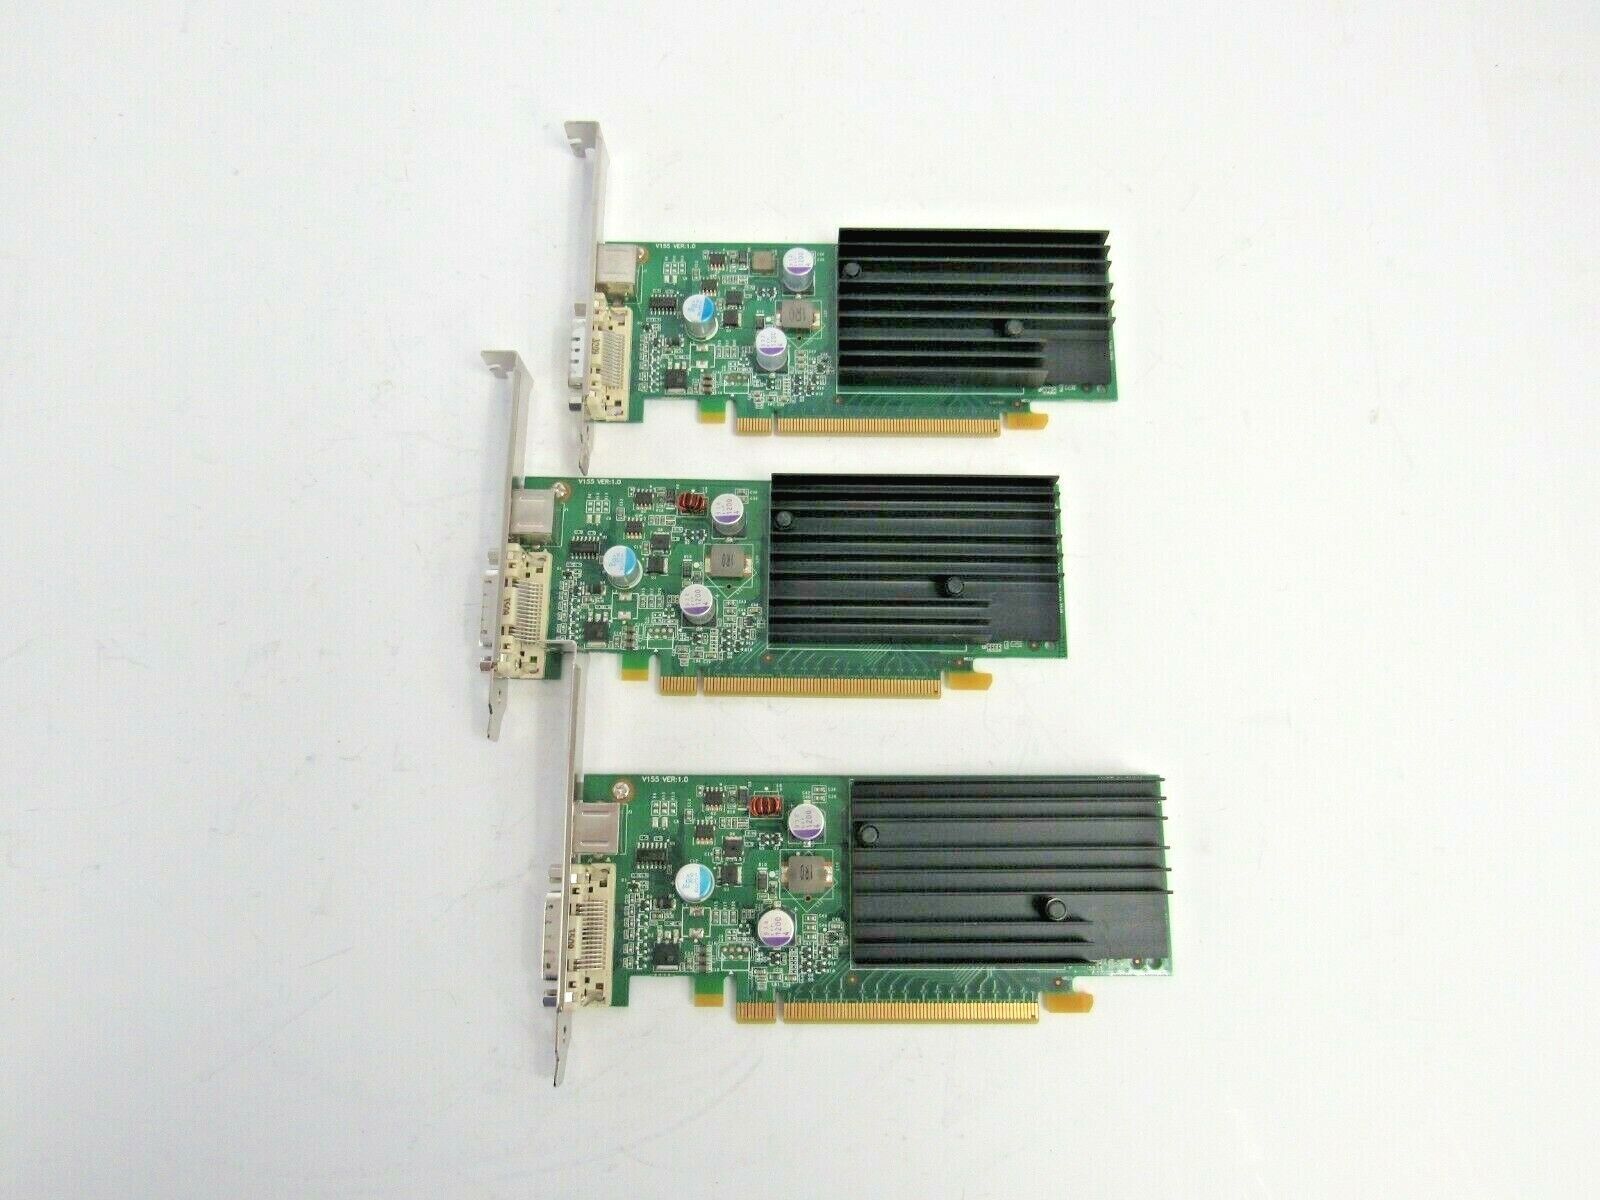 Dell (Lot of 3) K192G GeForce 9300 GE 256MB DDR2 PCI2 2.0 x16 Graphics Card 19-4 - $21.82